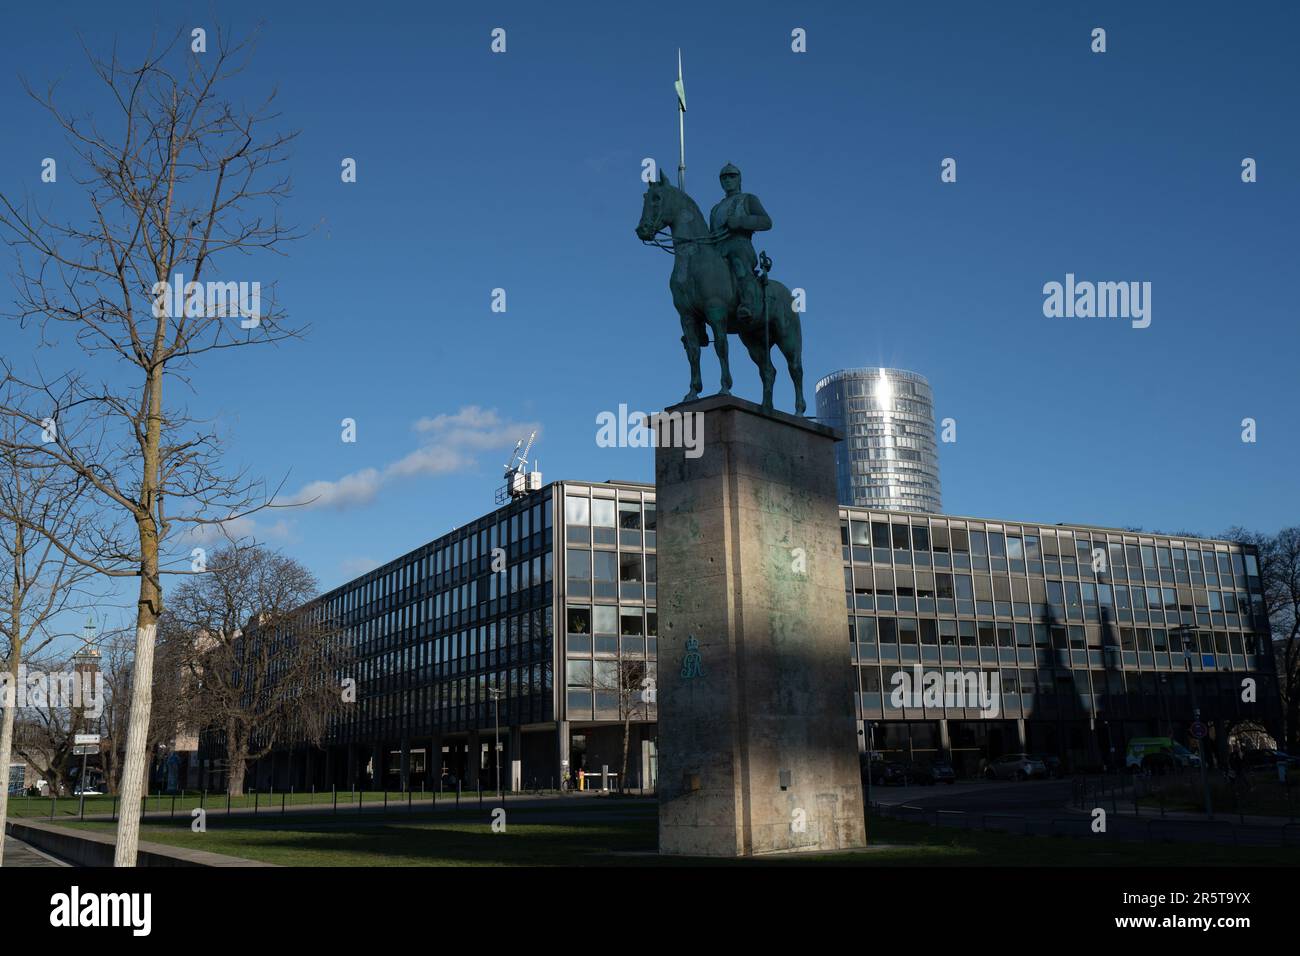 A black and white image of a majestic equestrian statue of a man atop a horse in front of a grand, imposing building Stock Photo